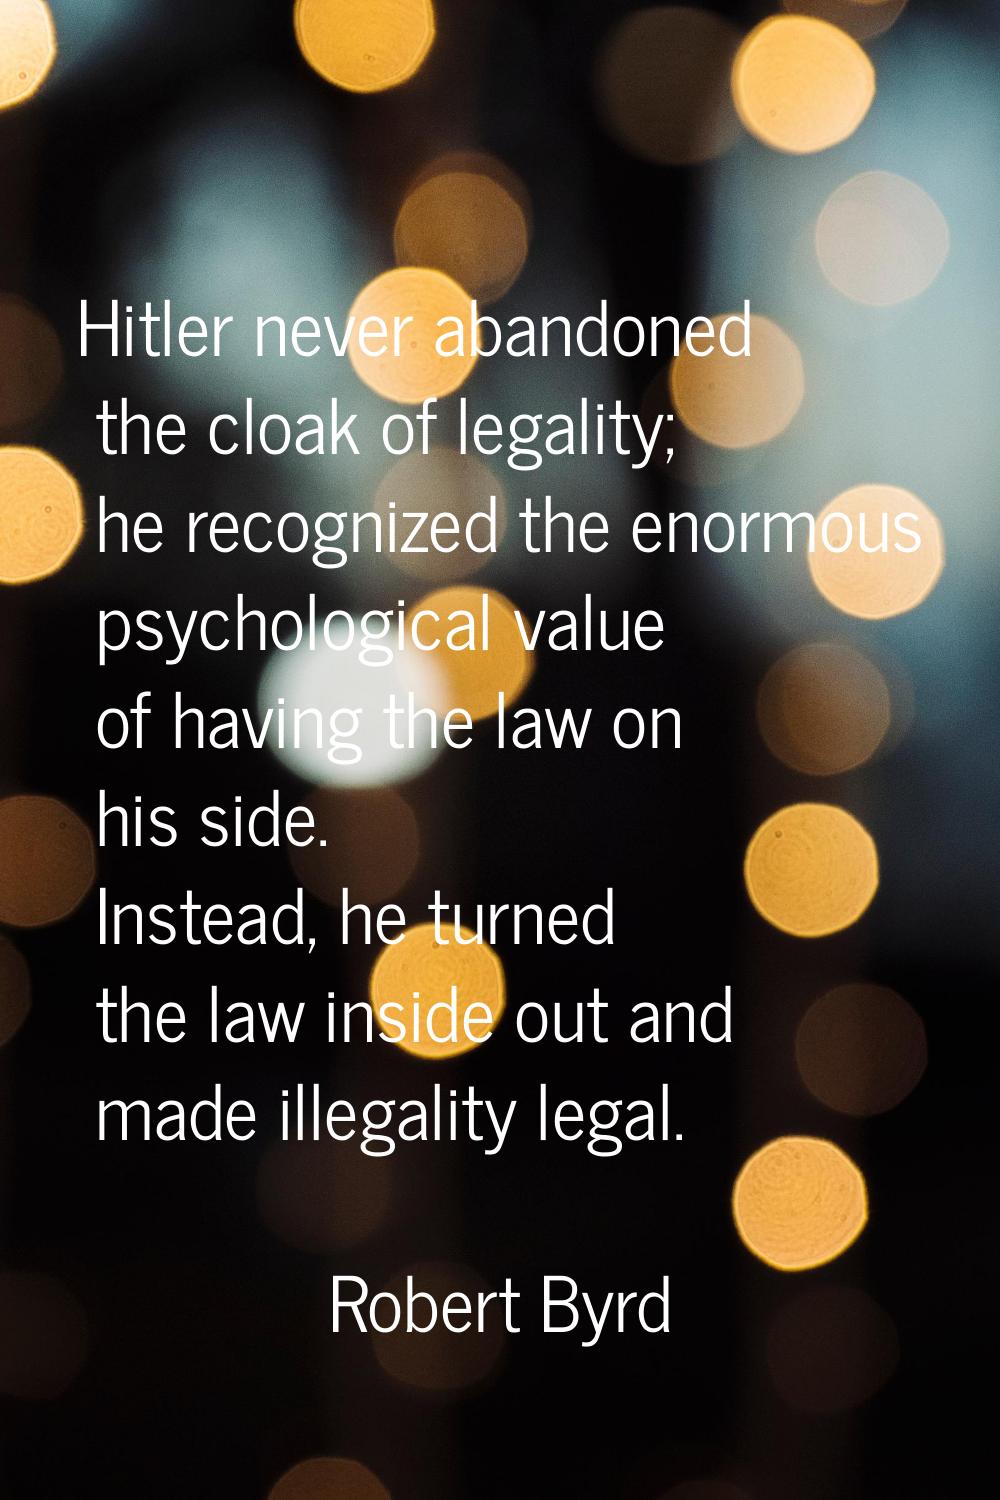 Hitler never abandoned the cloak of legality; he recognized the enormous psychological value of hav